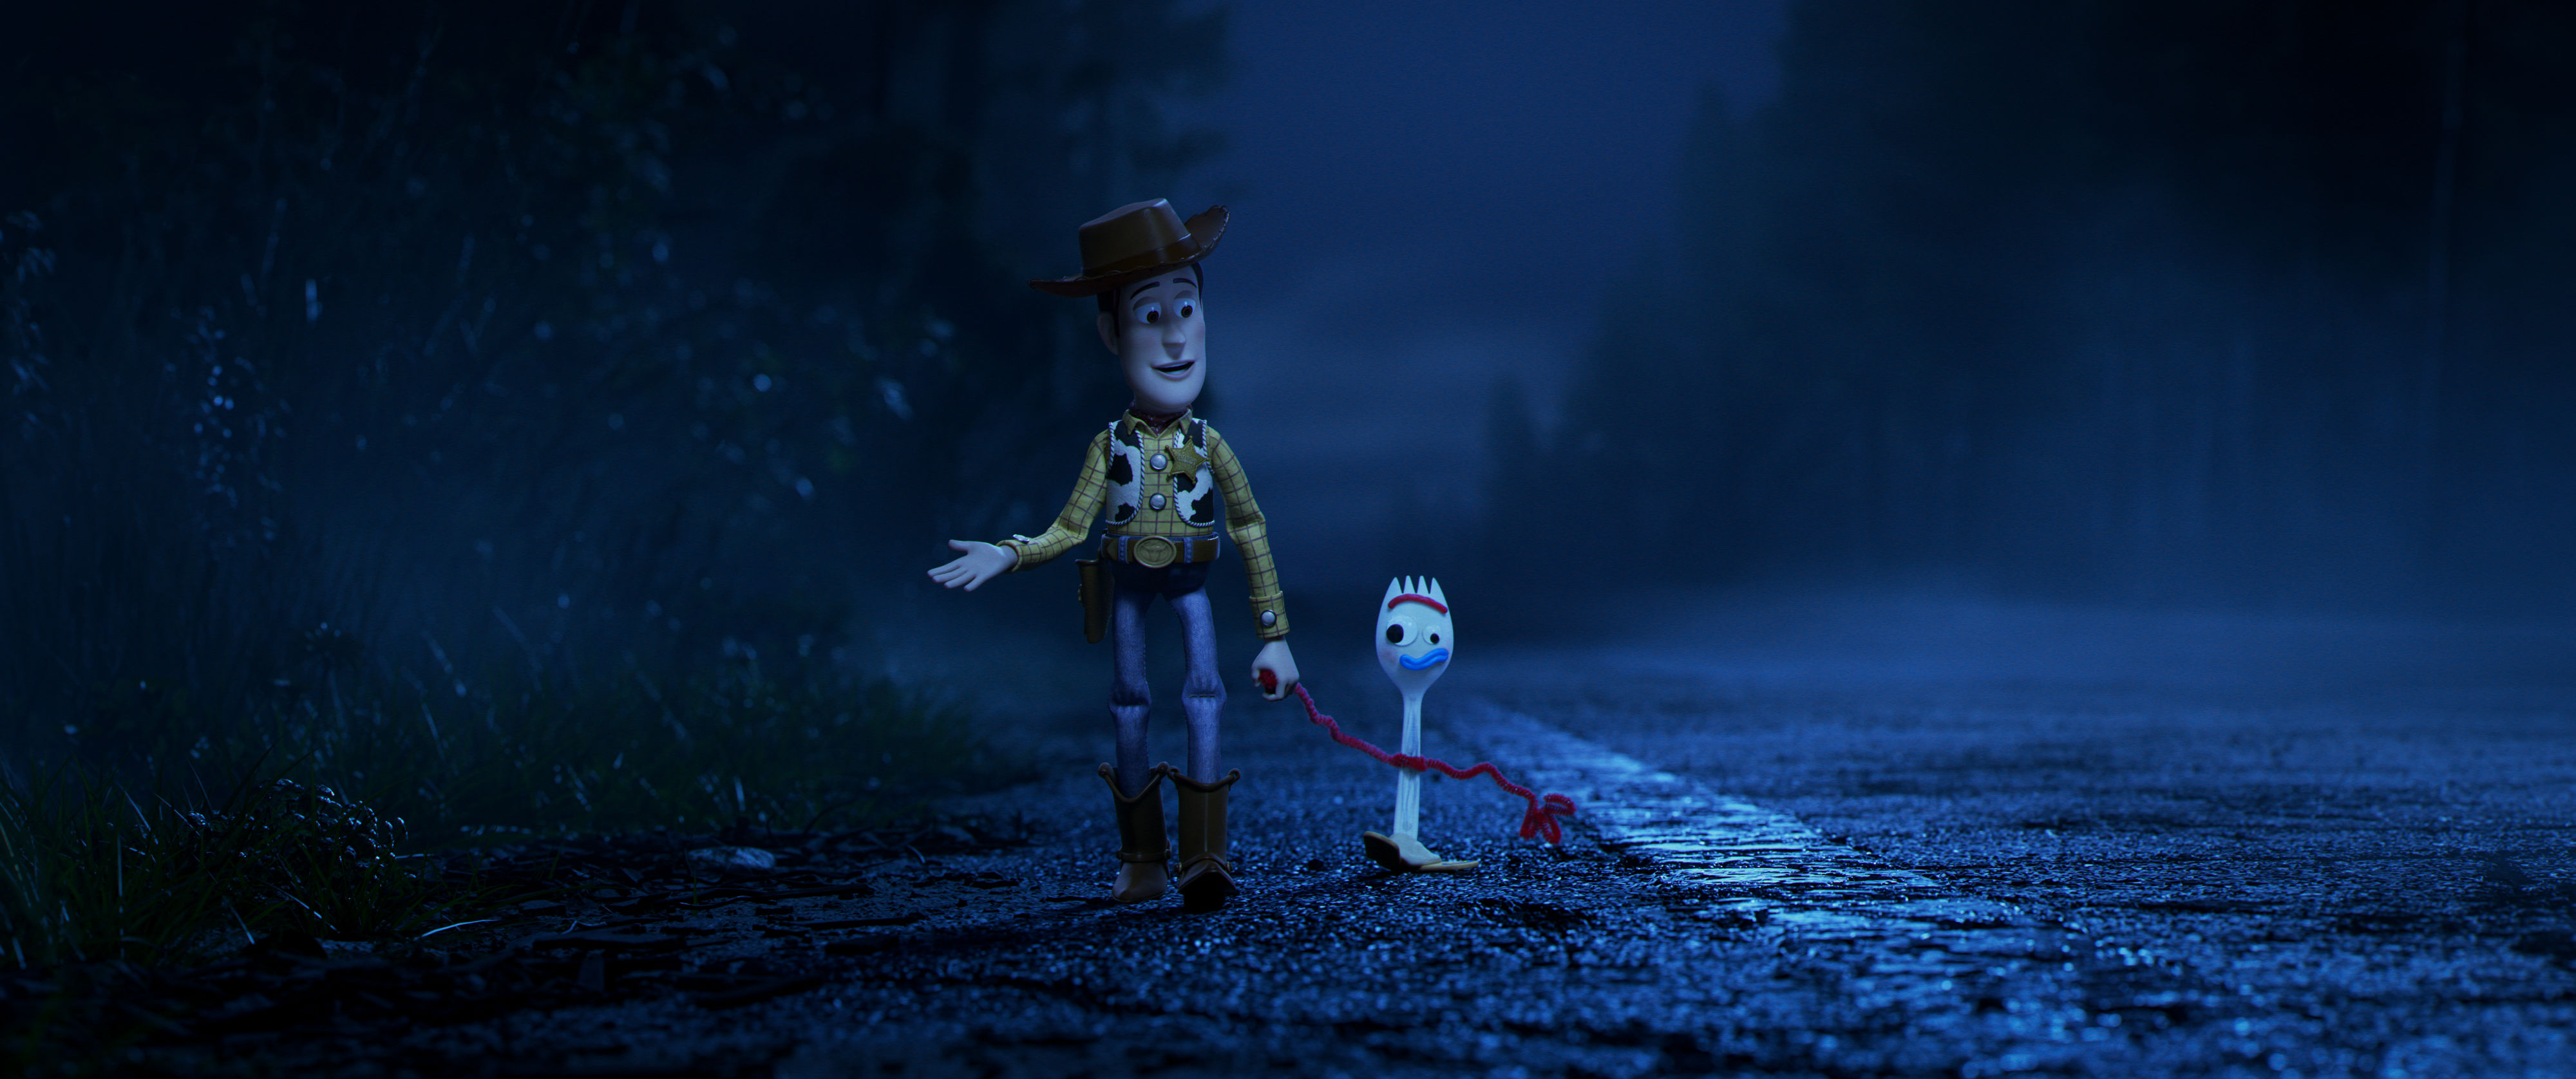 Toy Story 4 Trailer Will Make You Realize How Much A Sequel Was Needed